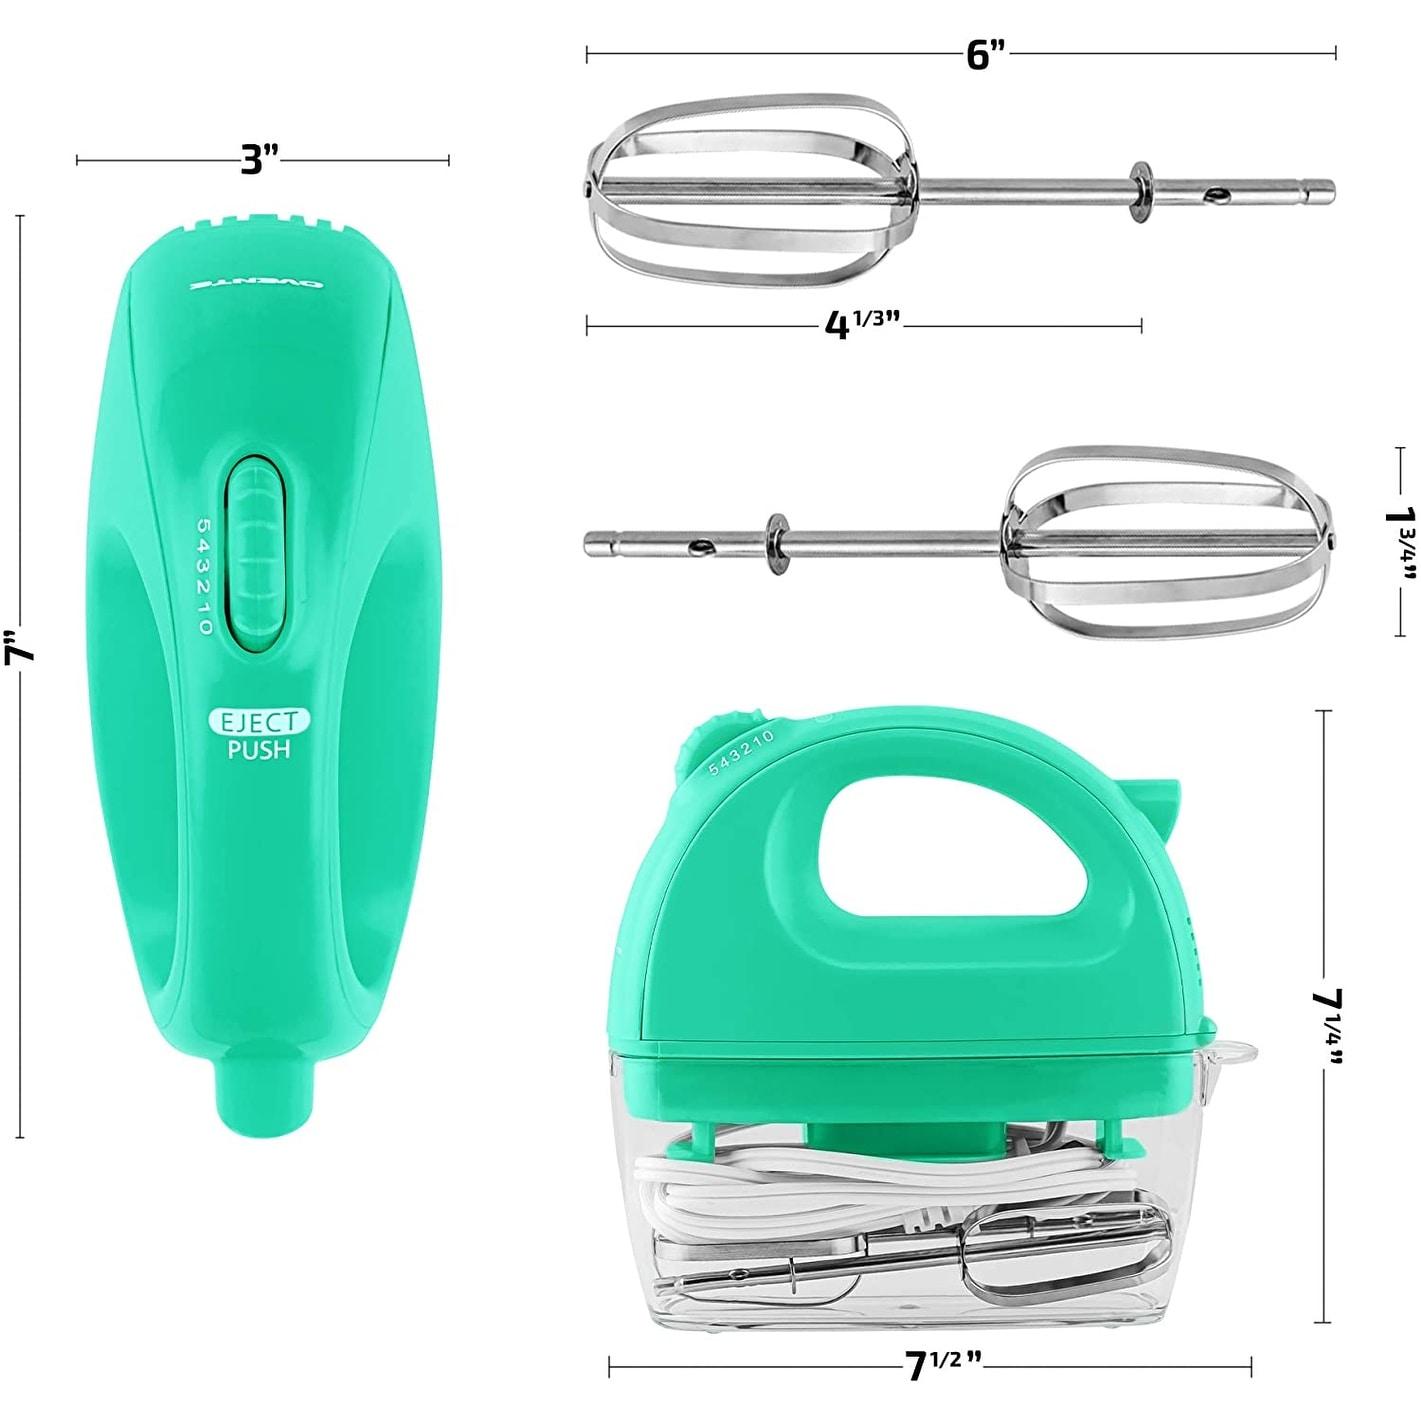 https://ak1.ostkcdn.com/images/products/is/images/direct/245b7ab52f9757bb7079f09c571873a42c0a7ec2/Ovente-Portable-Electric-Hand-Mixer-5-Speed-Mixing%2C-Red-HM161R.jpg